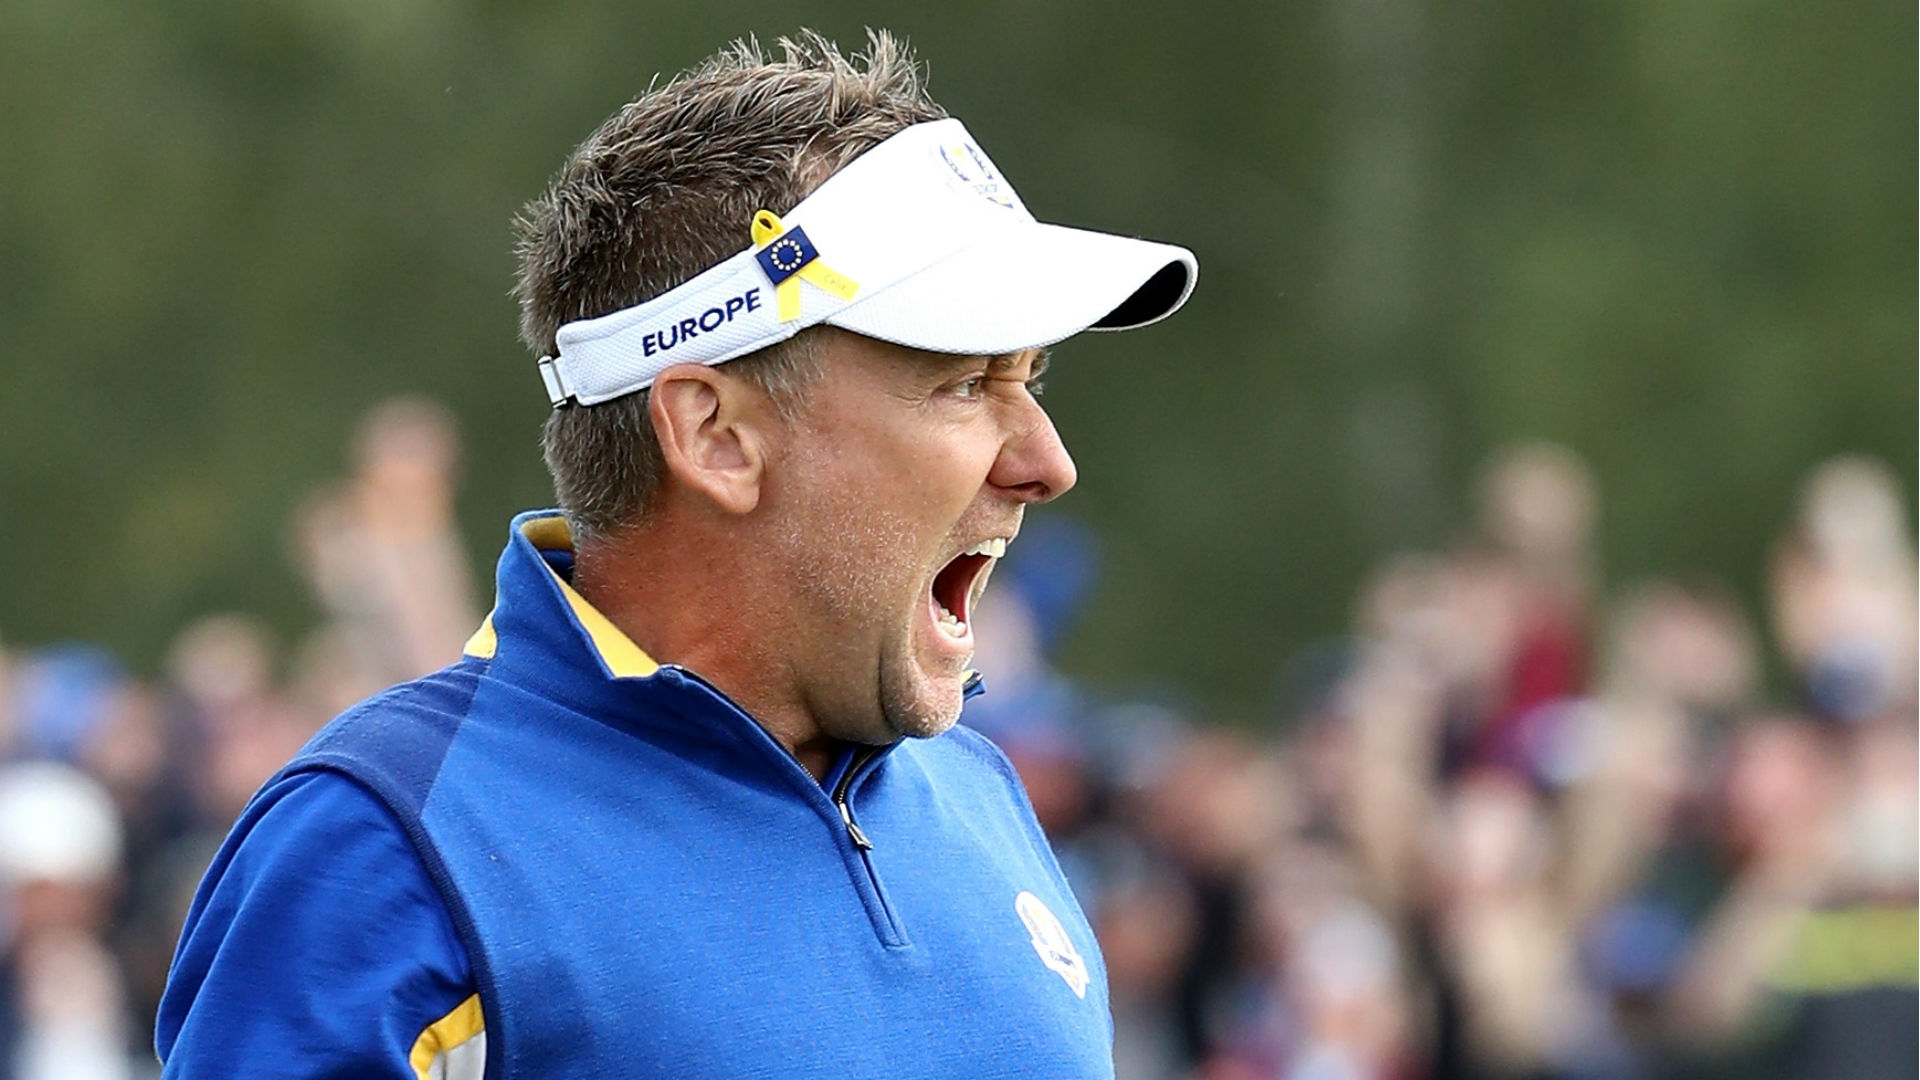 While he has typically thrived on the Ryder Cup atmosphere, Ian Poulter believes the event should be played even without fans.